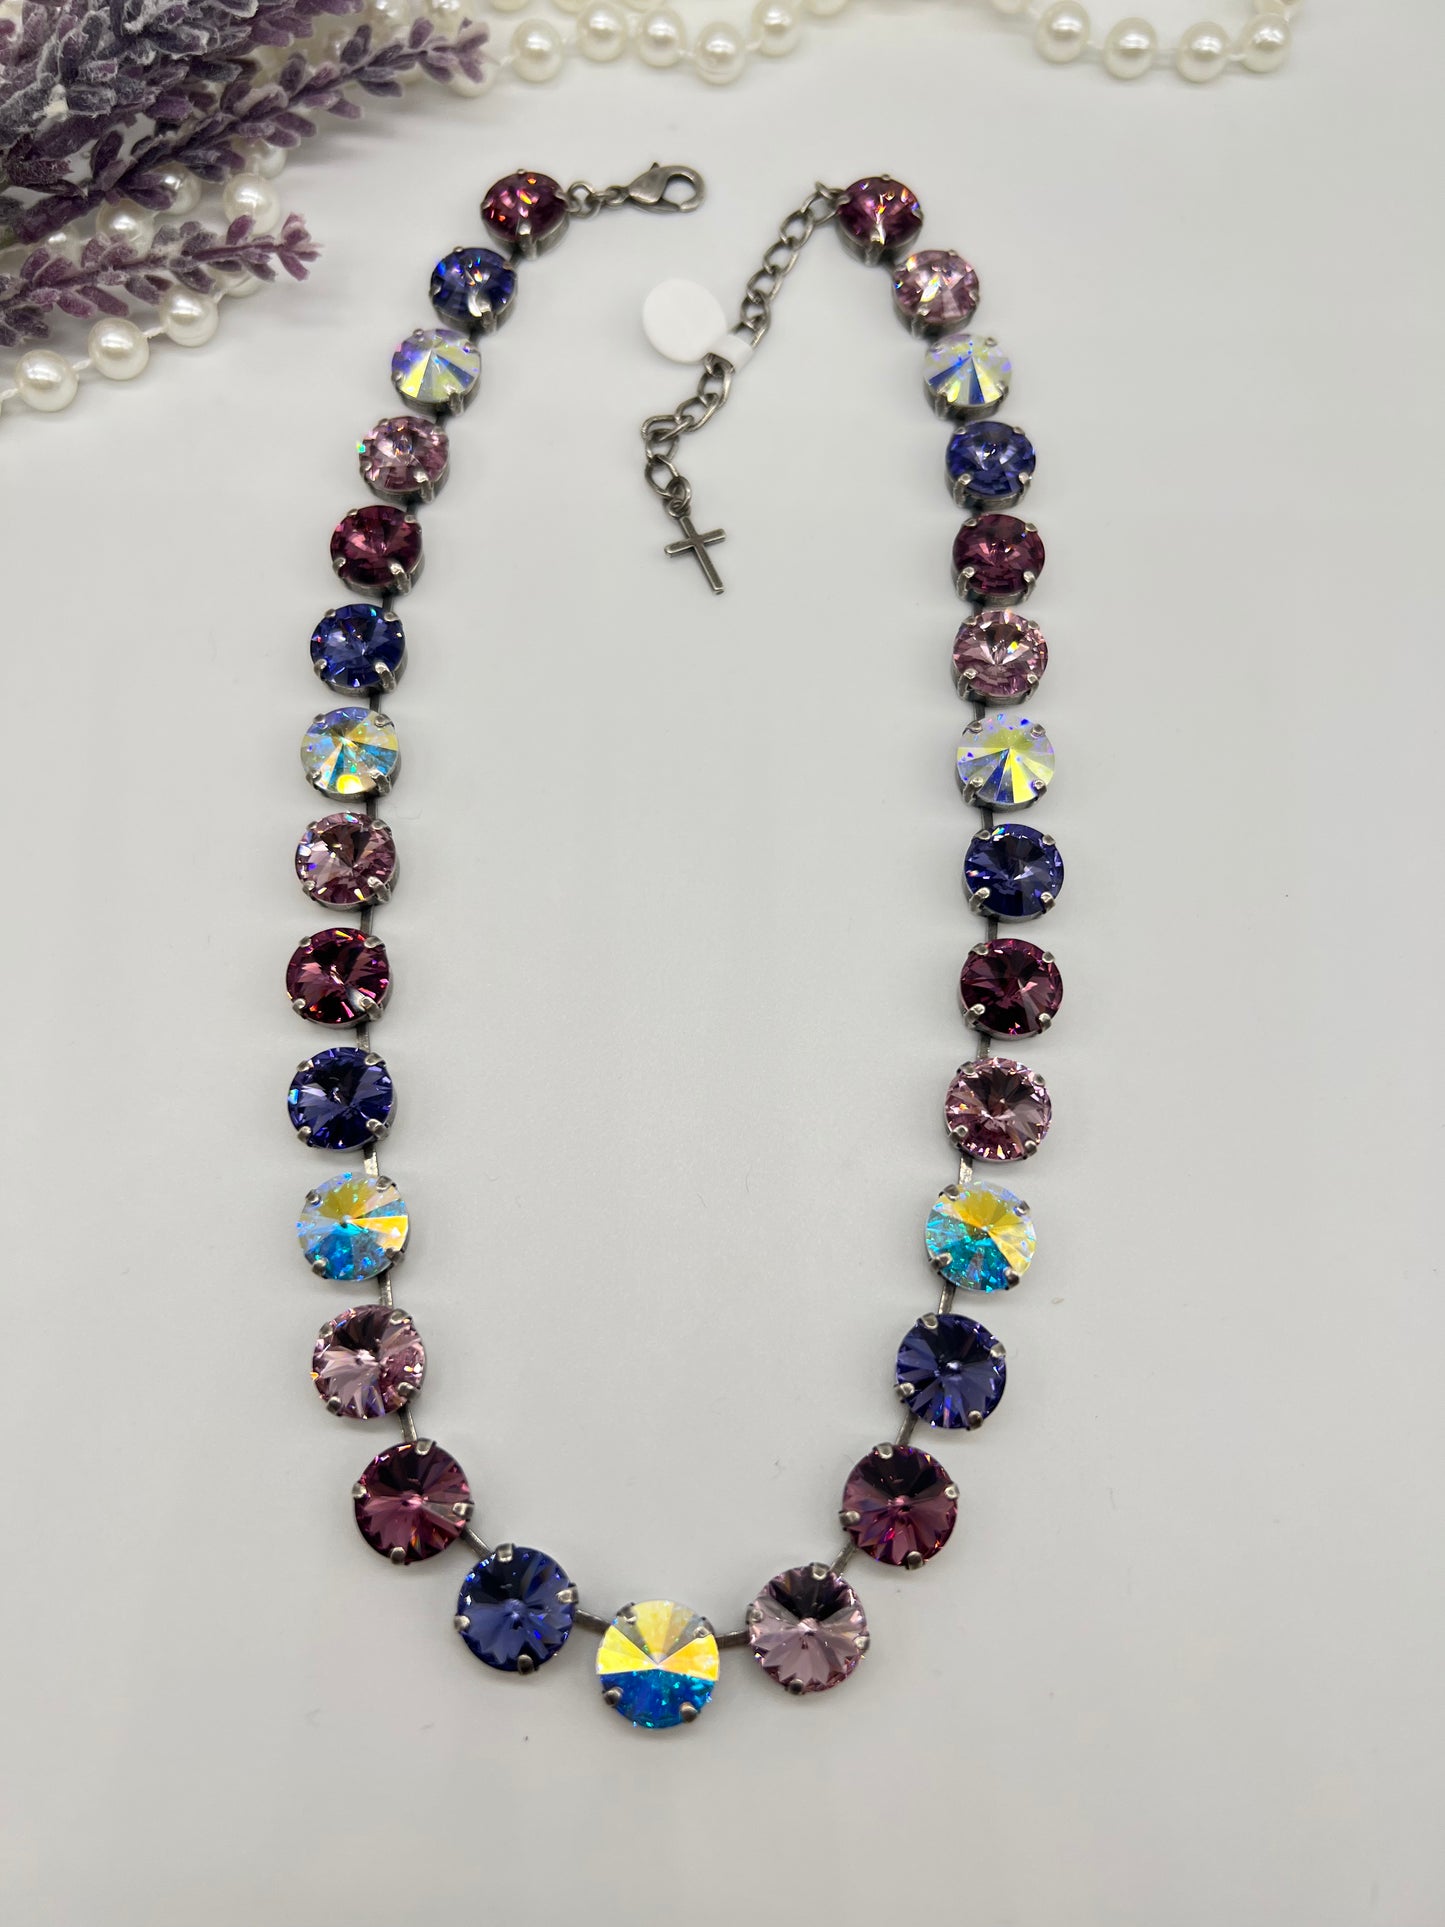 One-Eyed, One-Horned, Flying Purple People Eater Necklace